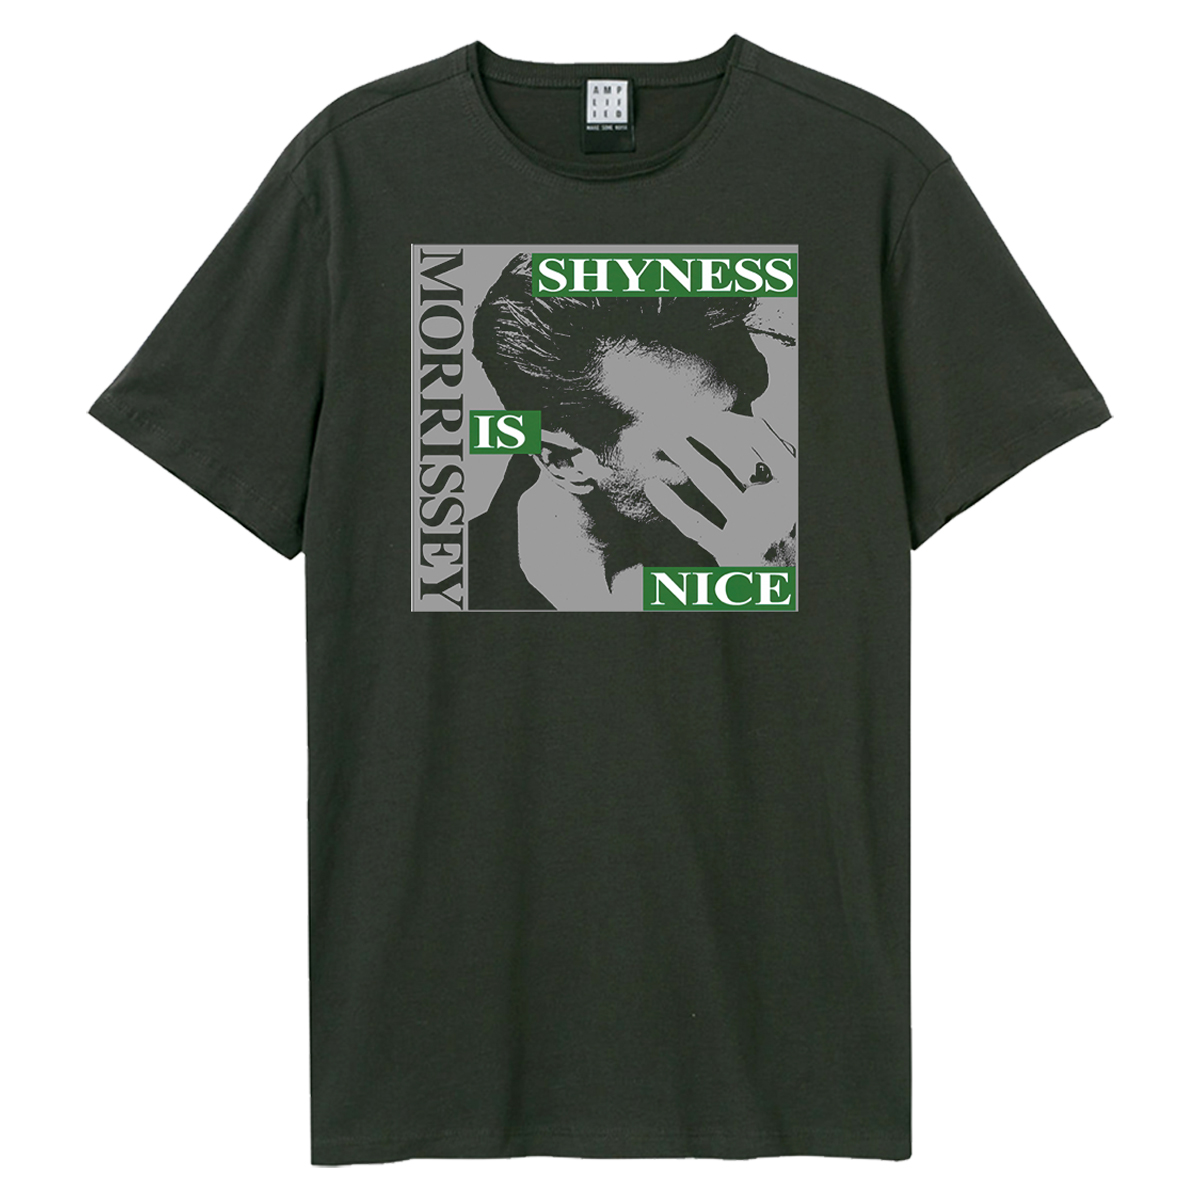 Morrissey - Shyness is Nice